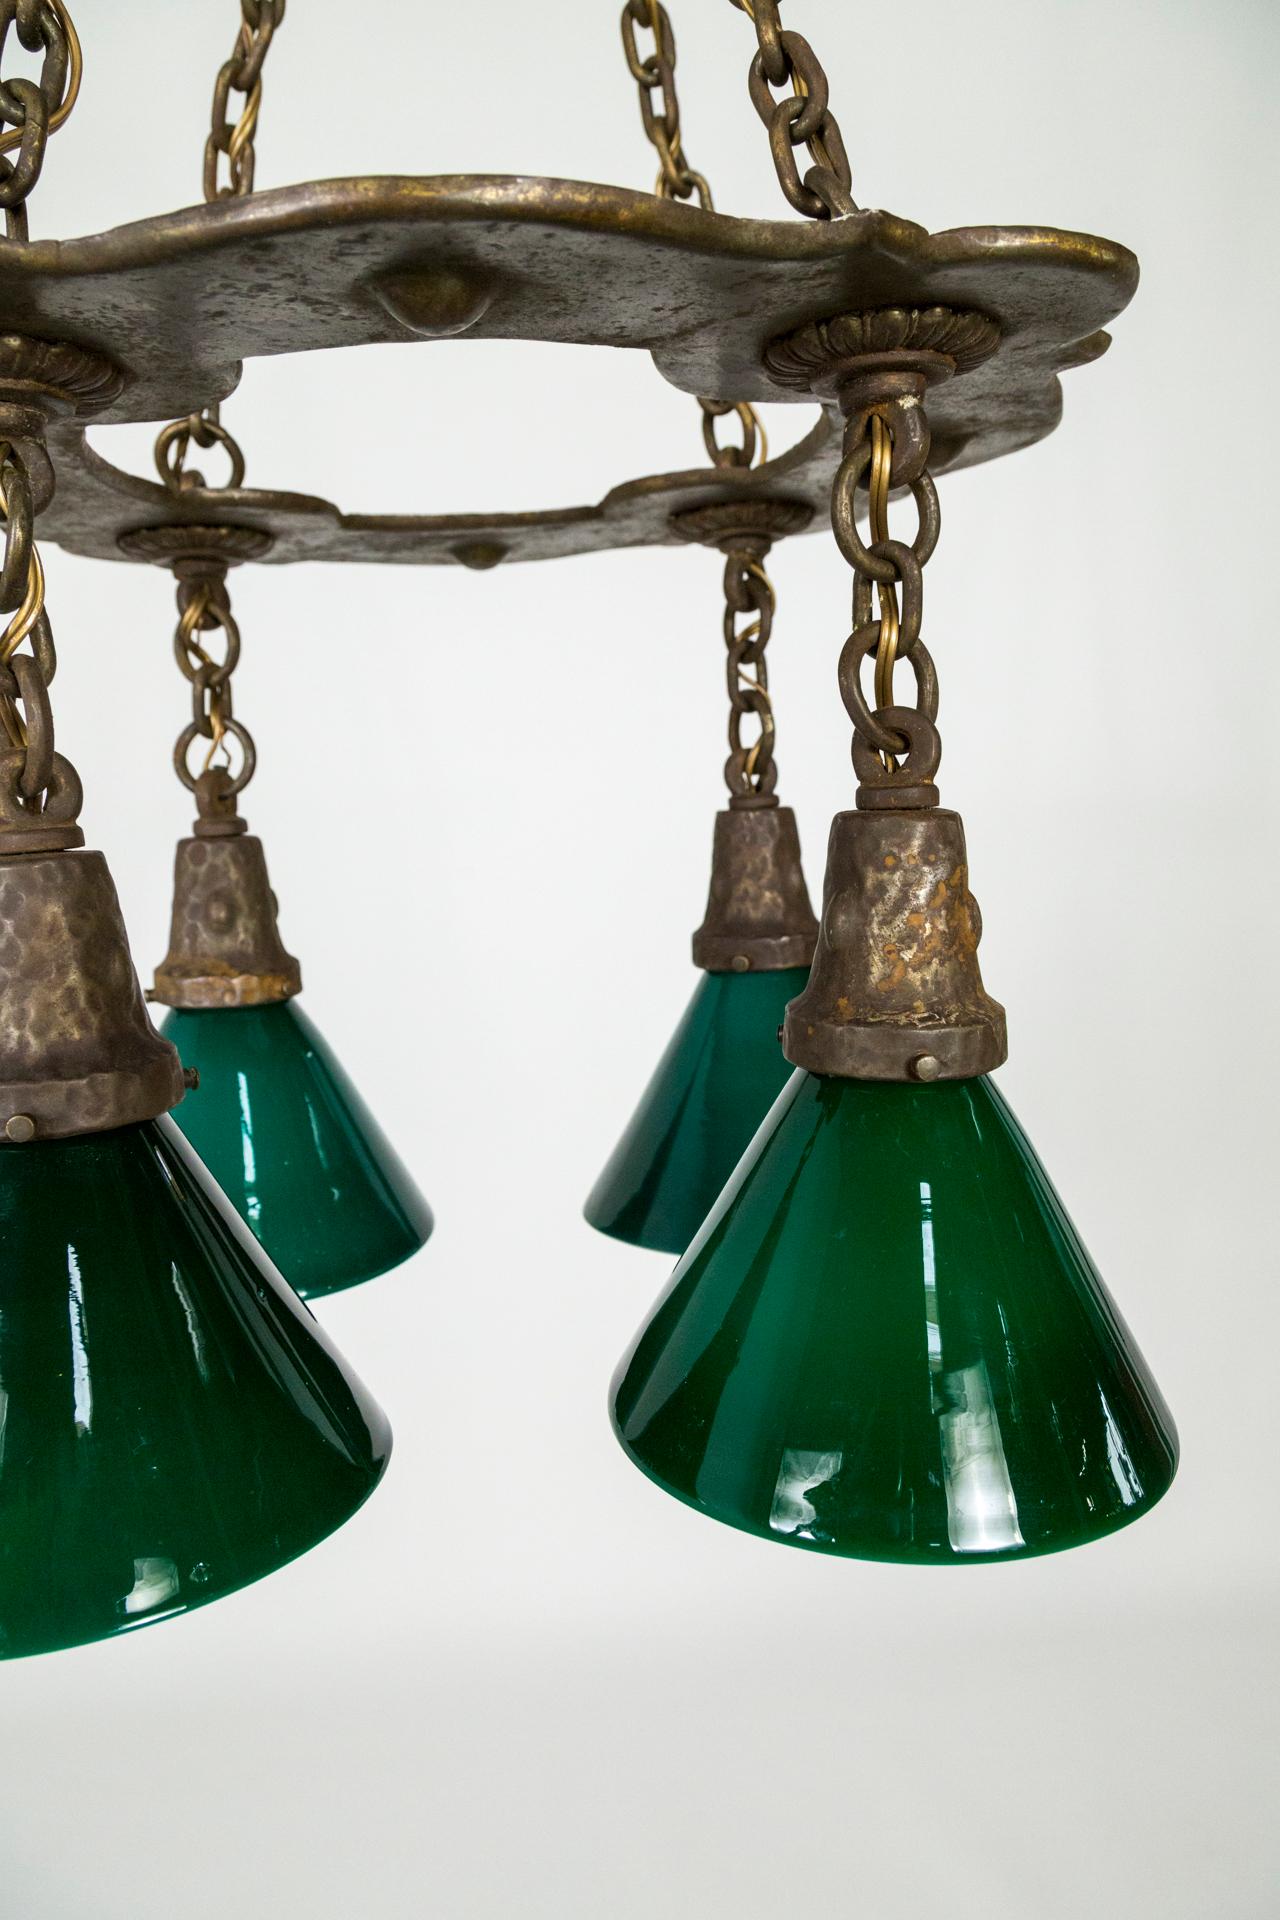 Arts & Crafts Hammered Darkened Metal Chandelier with Green Glass Shades For Sale 3